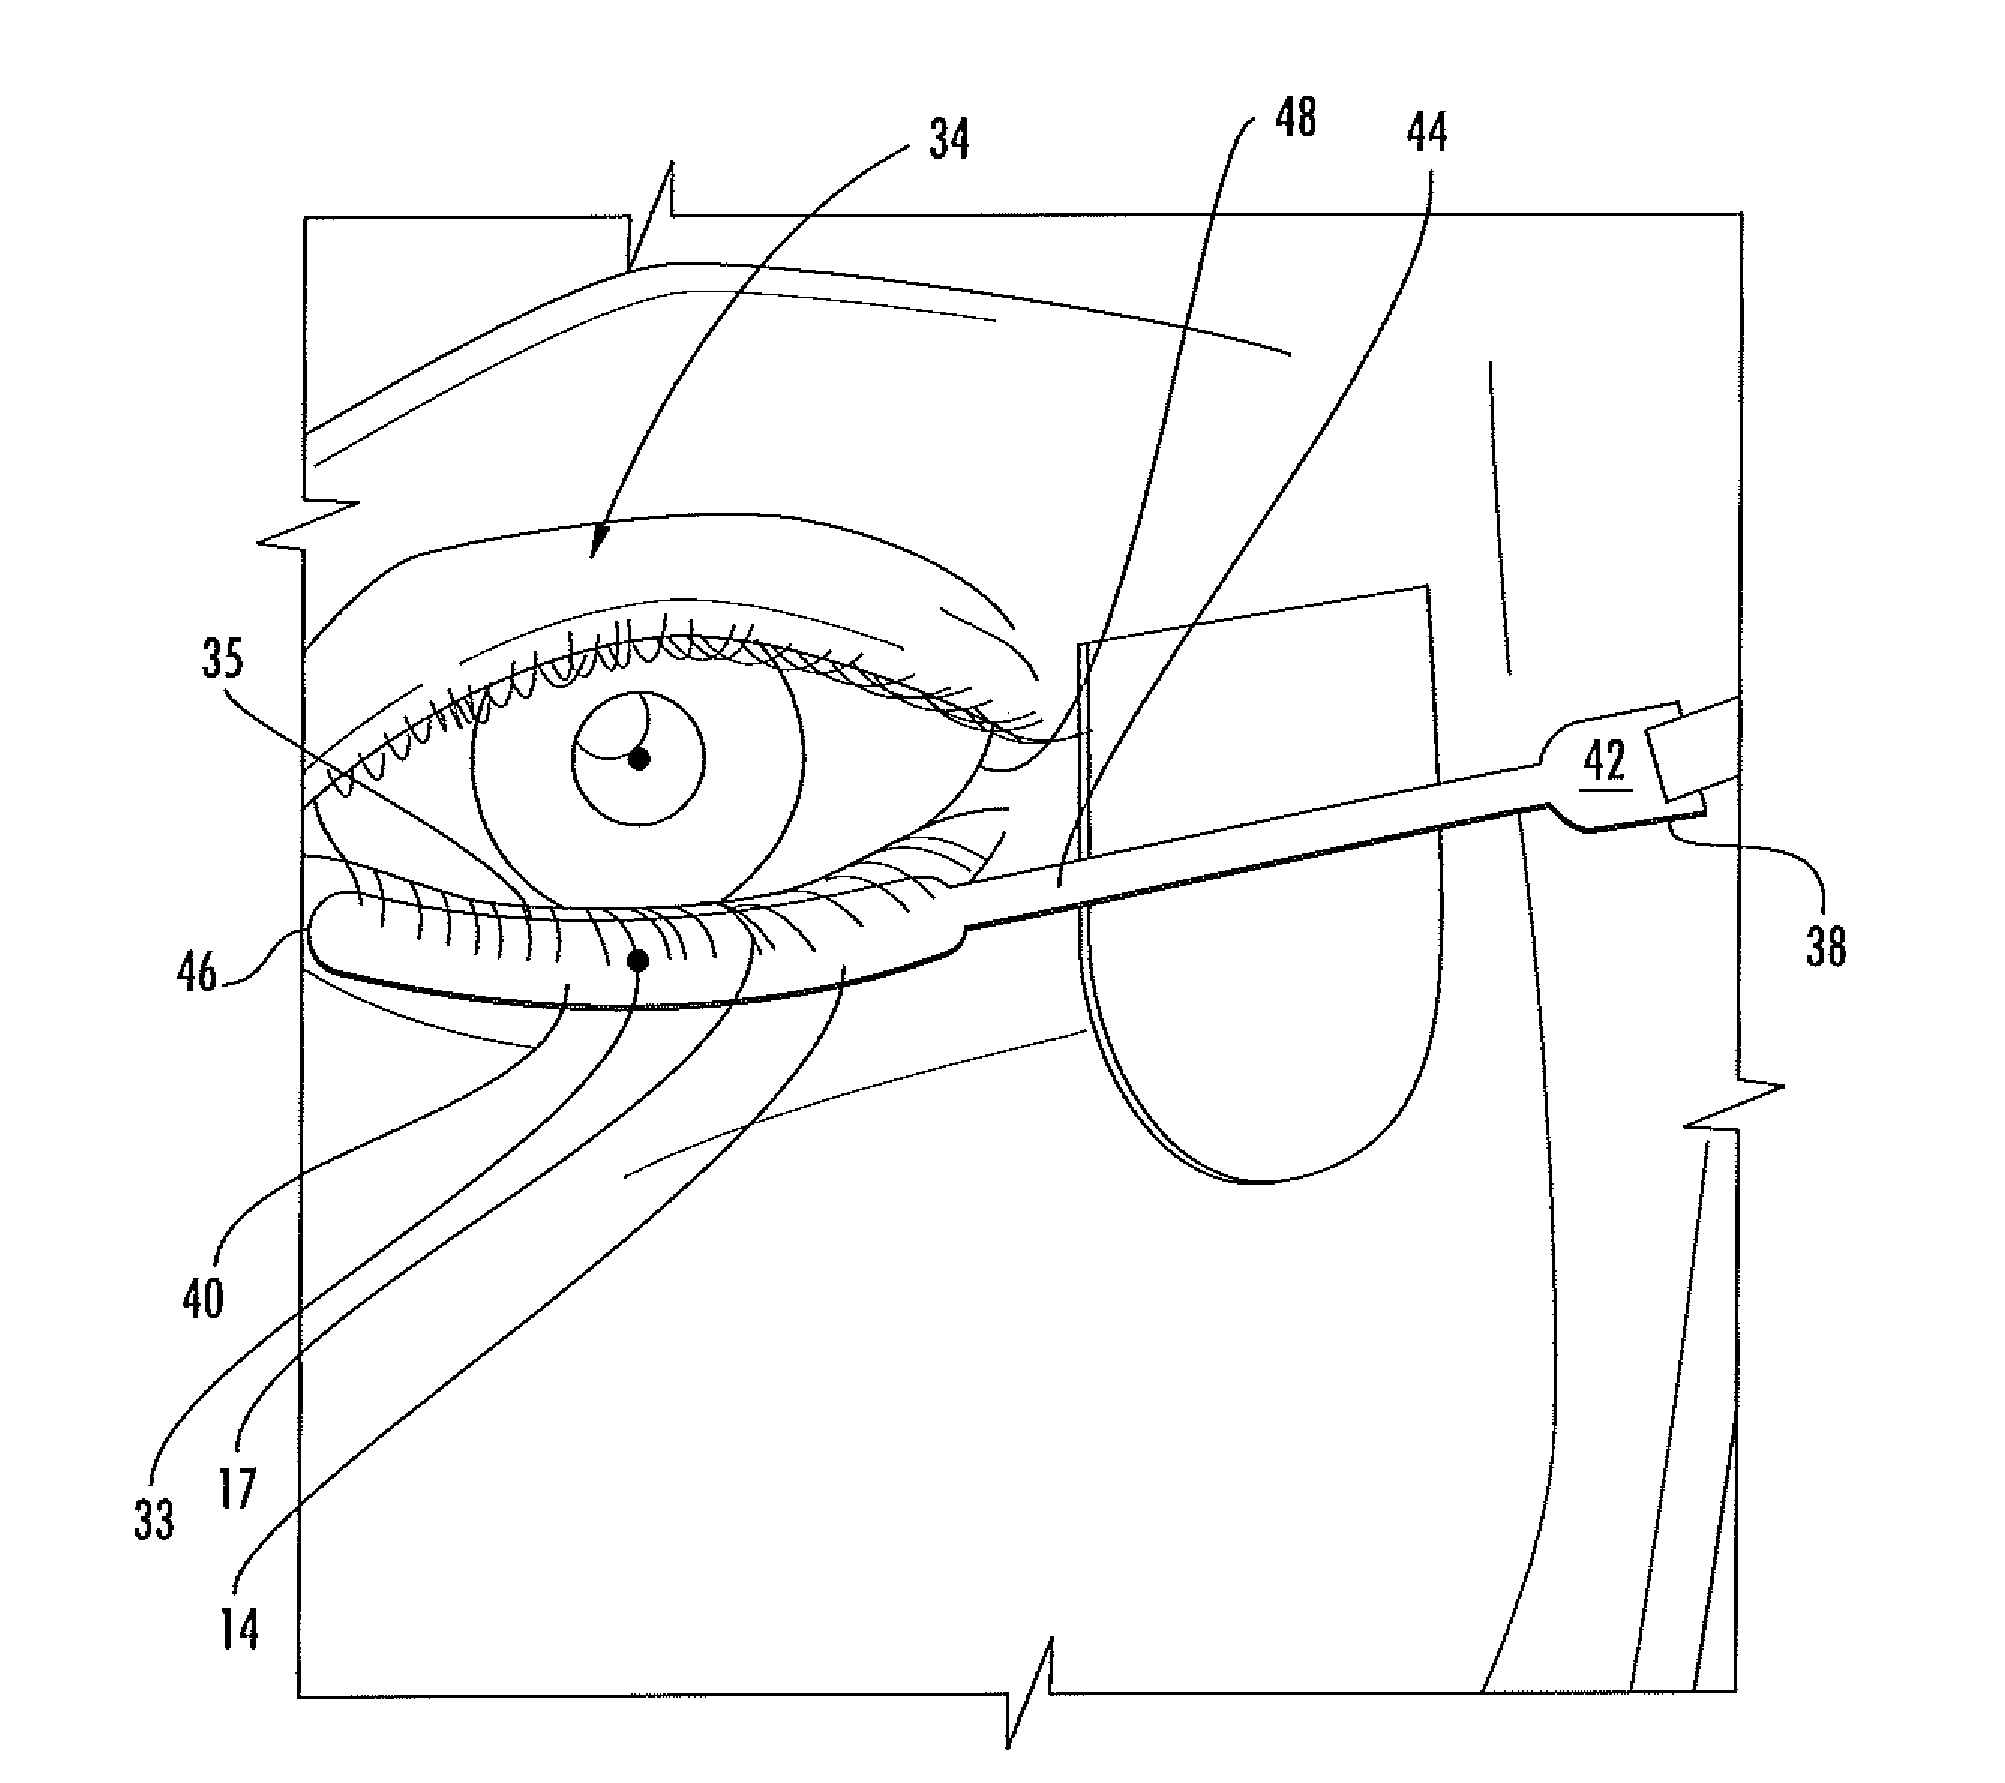 Electrode sensor assembly for electroretinography and pattern electroretinography